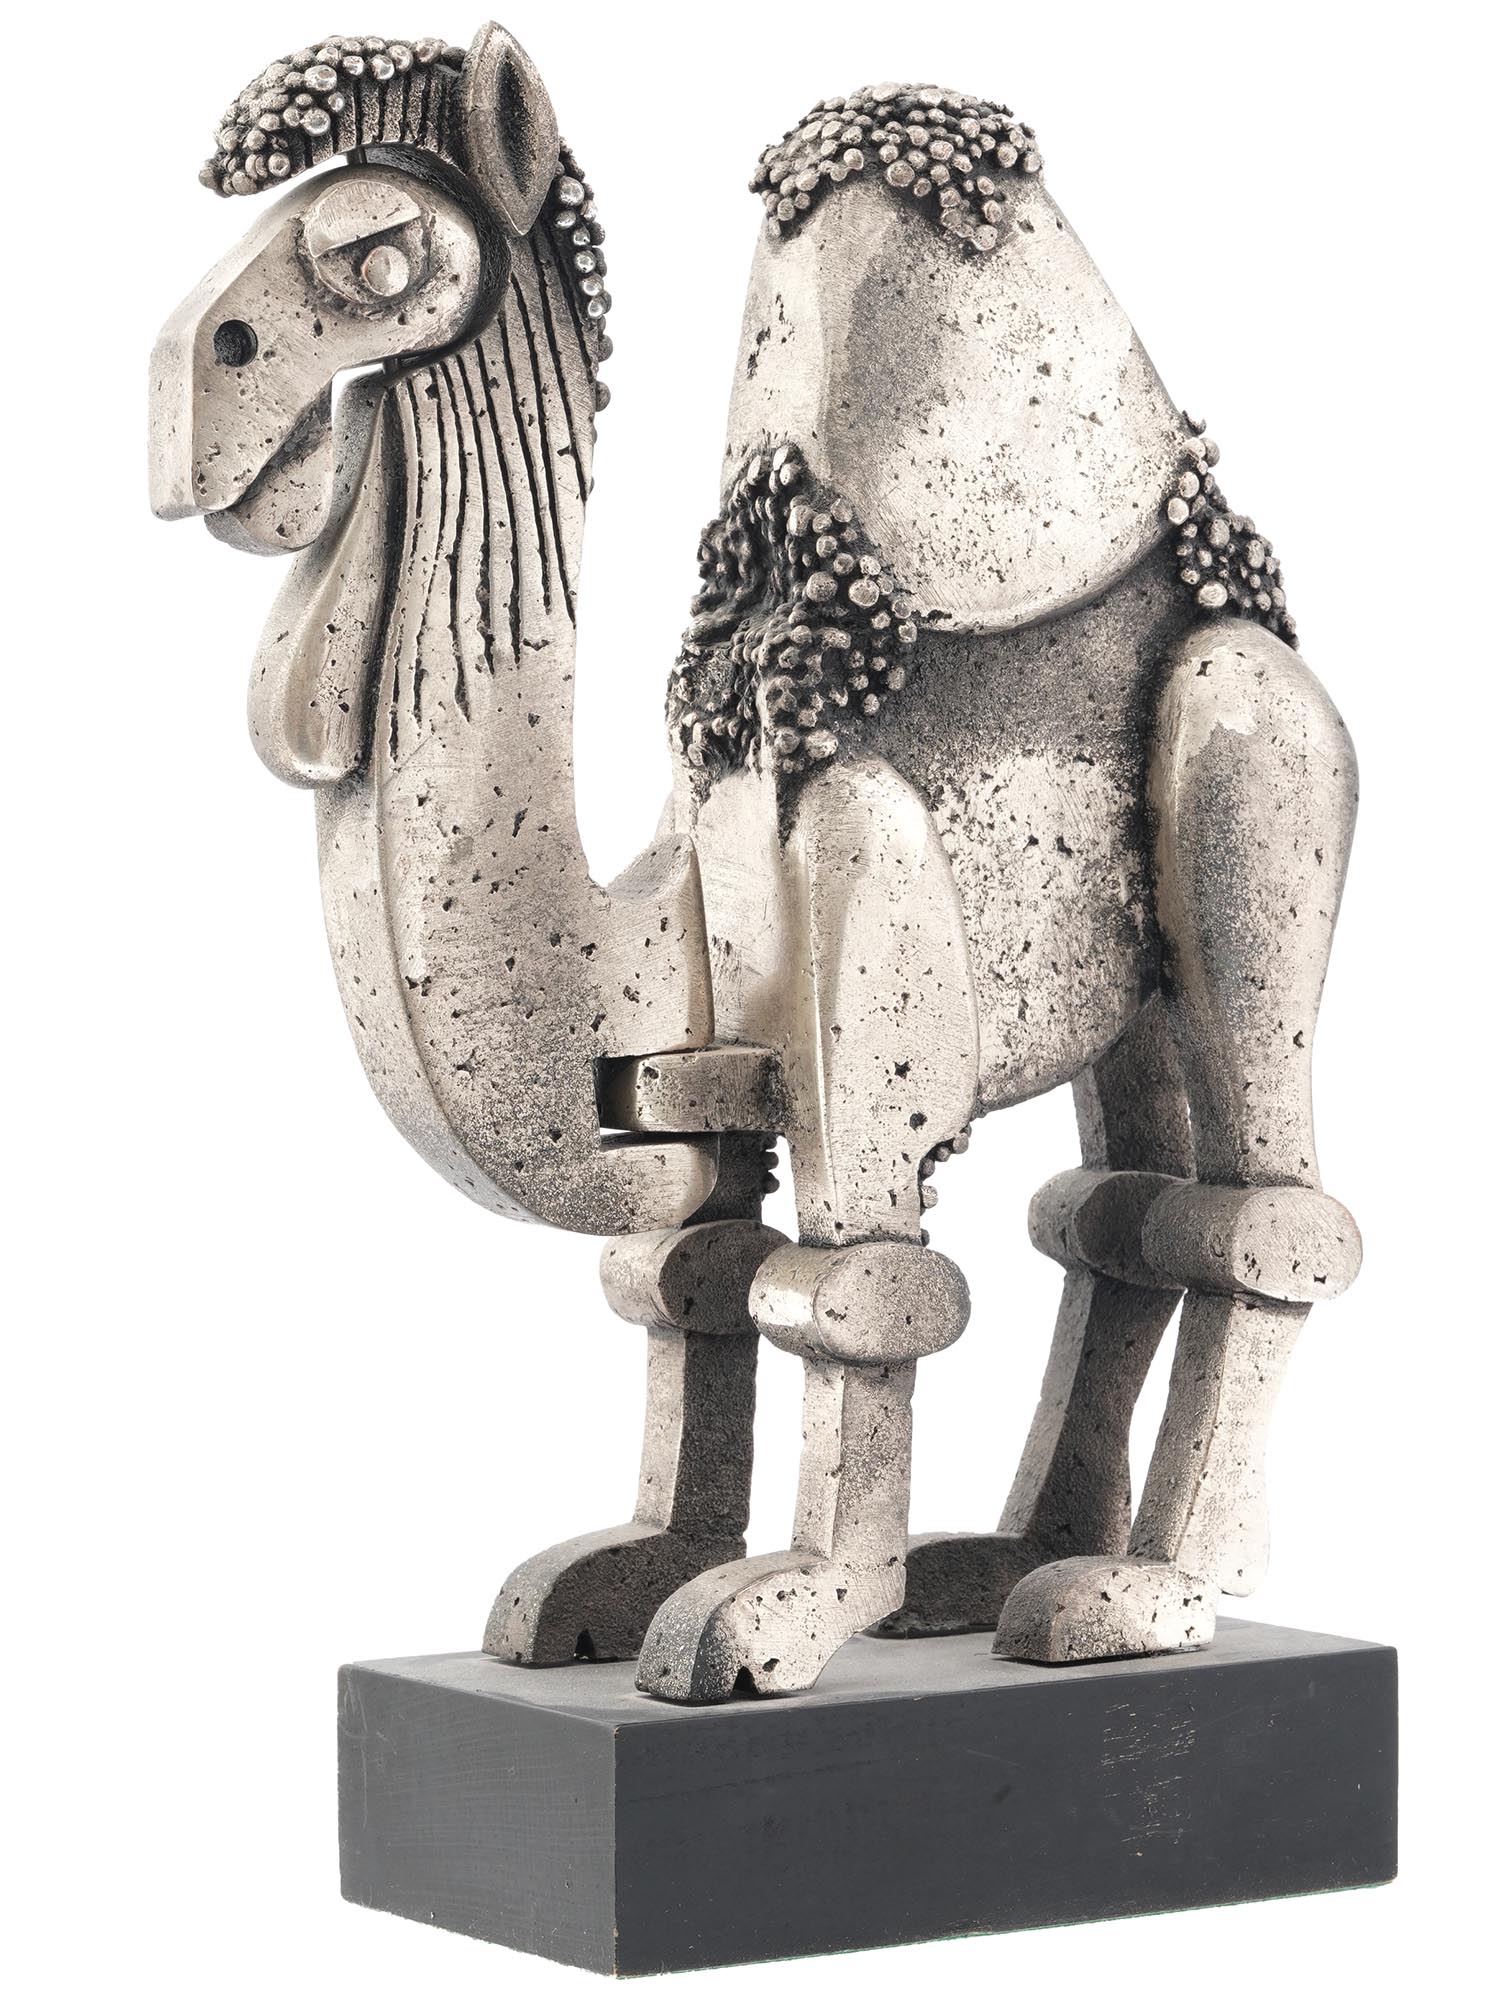 ISRAELI ARTICULATED CAMEL FIGURE BY FRANK MEISLER PIC-0